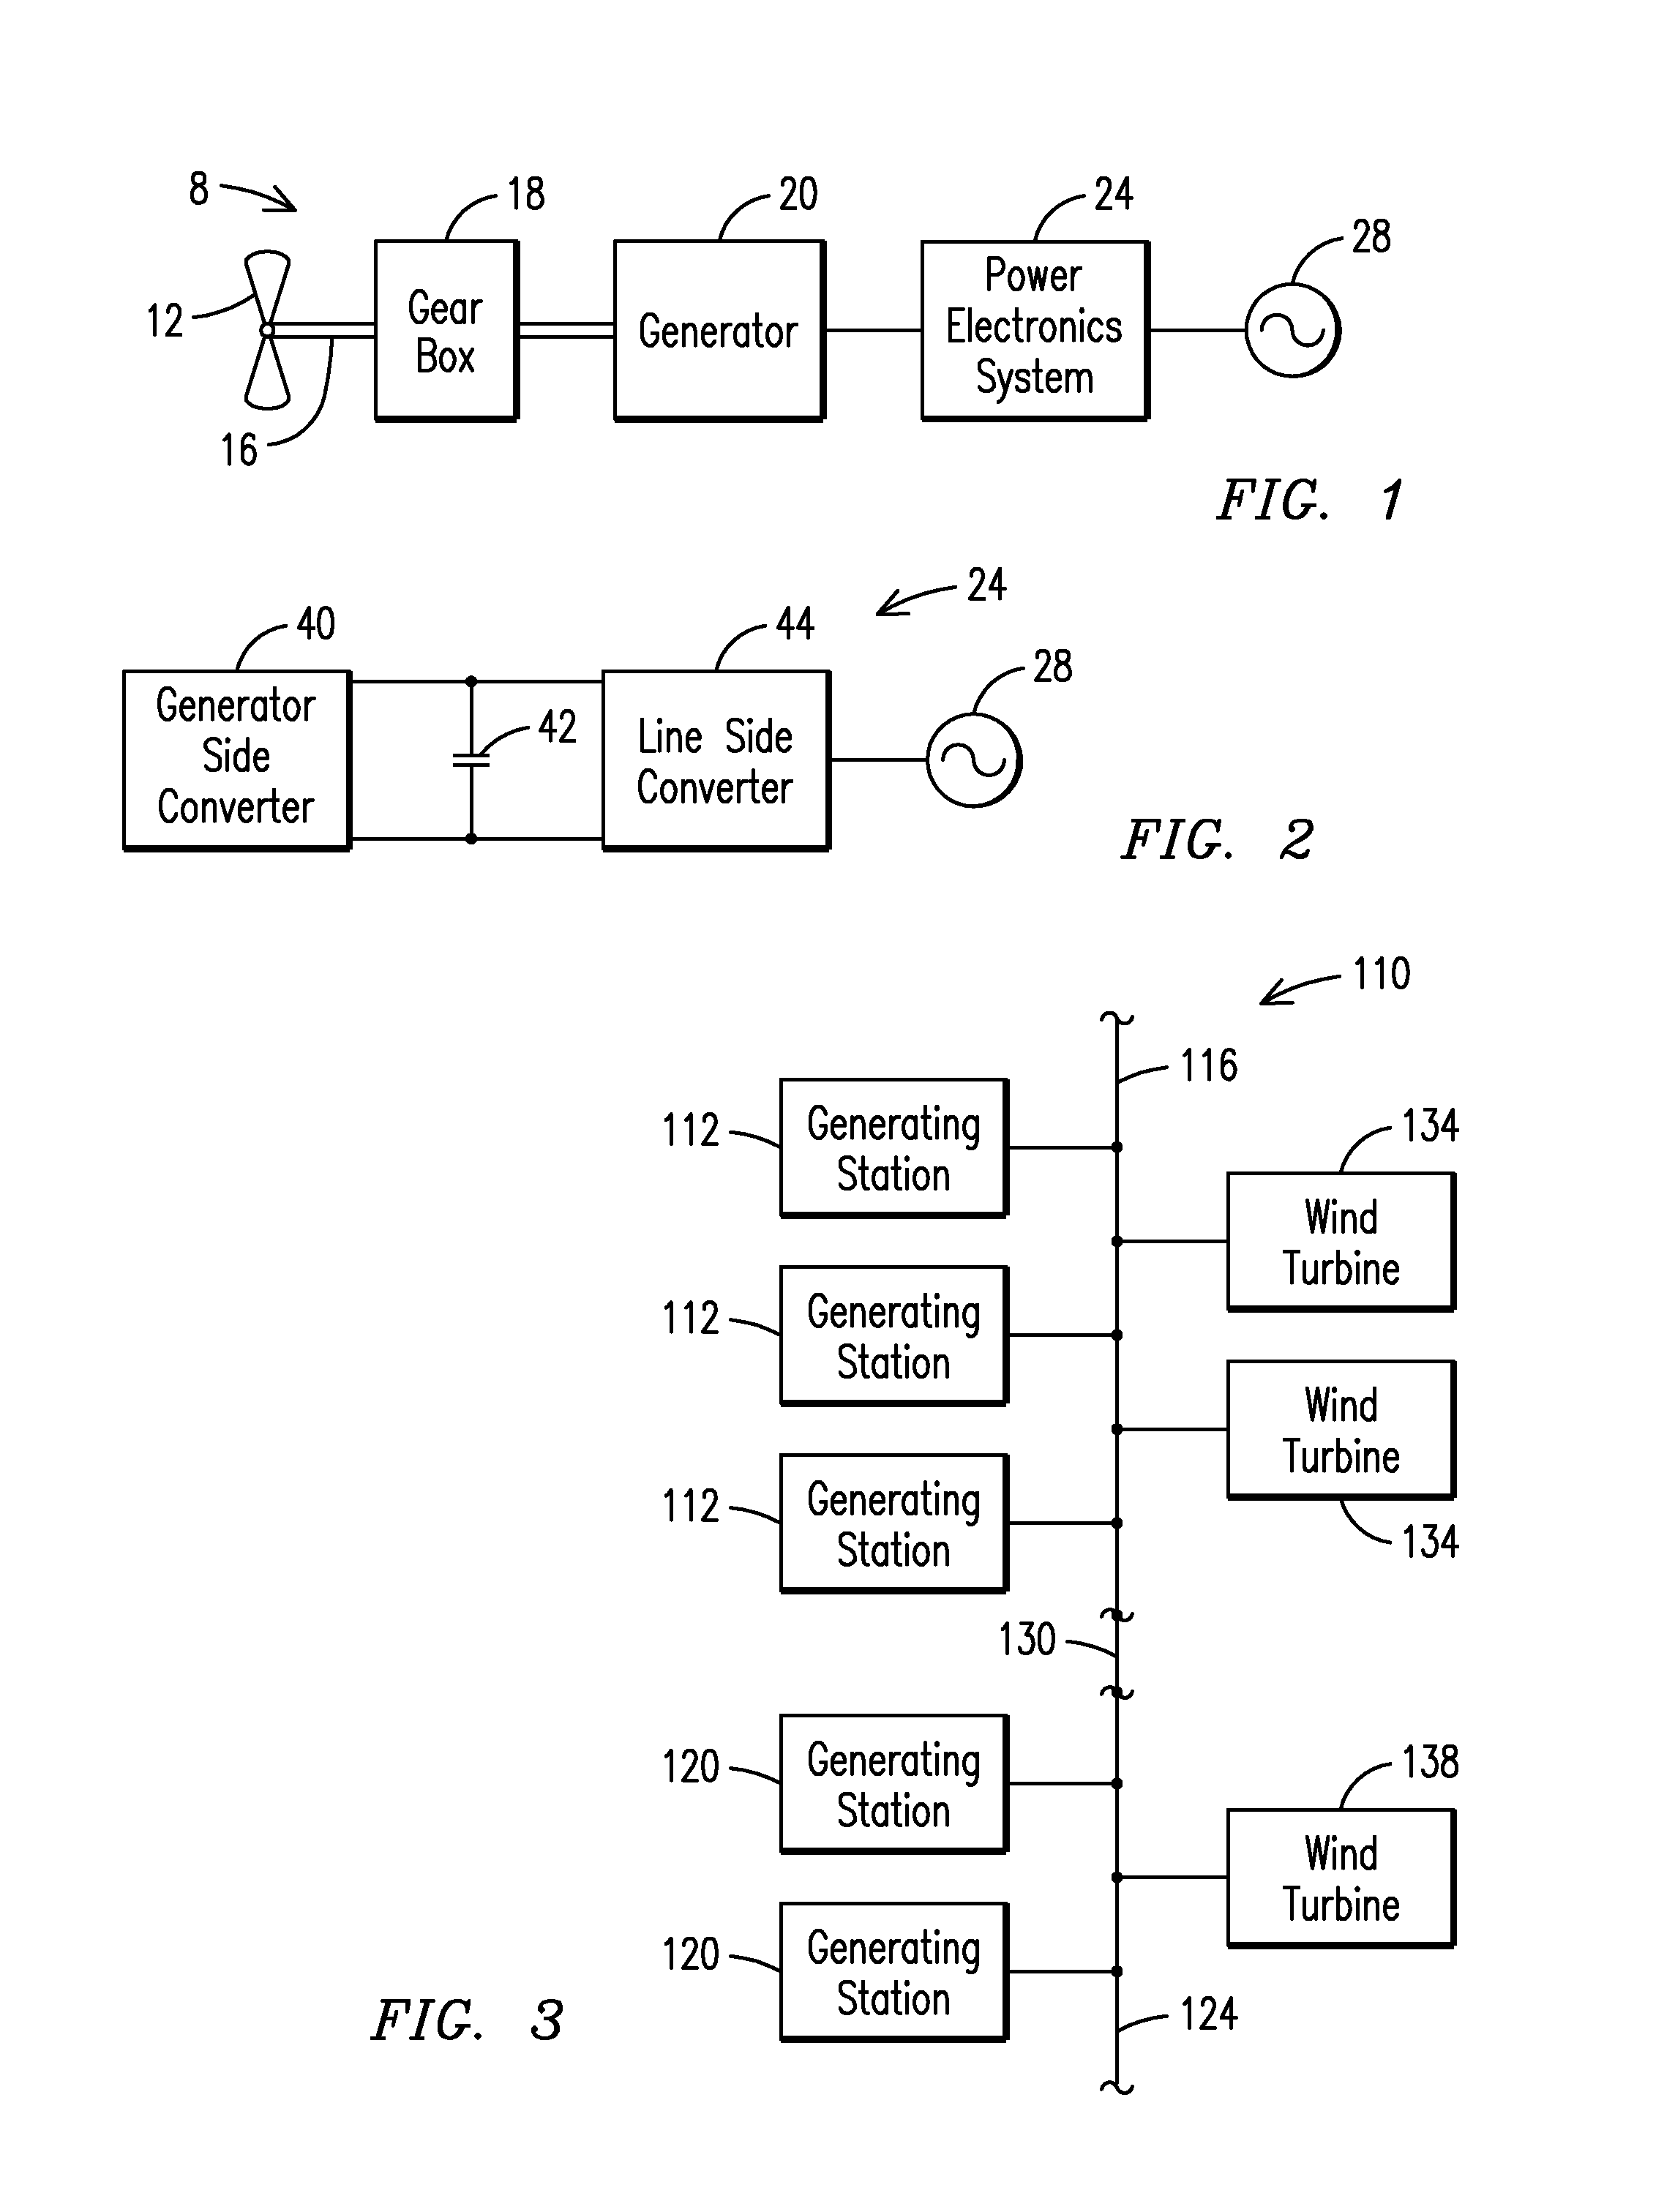 Power Oscillation Damping Employing a Full or Partial Conversion Wind Turbine